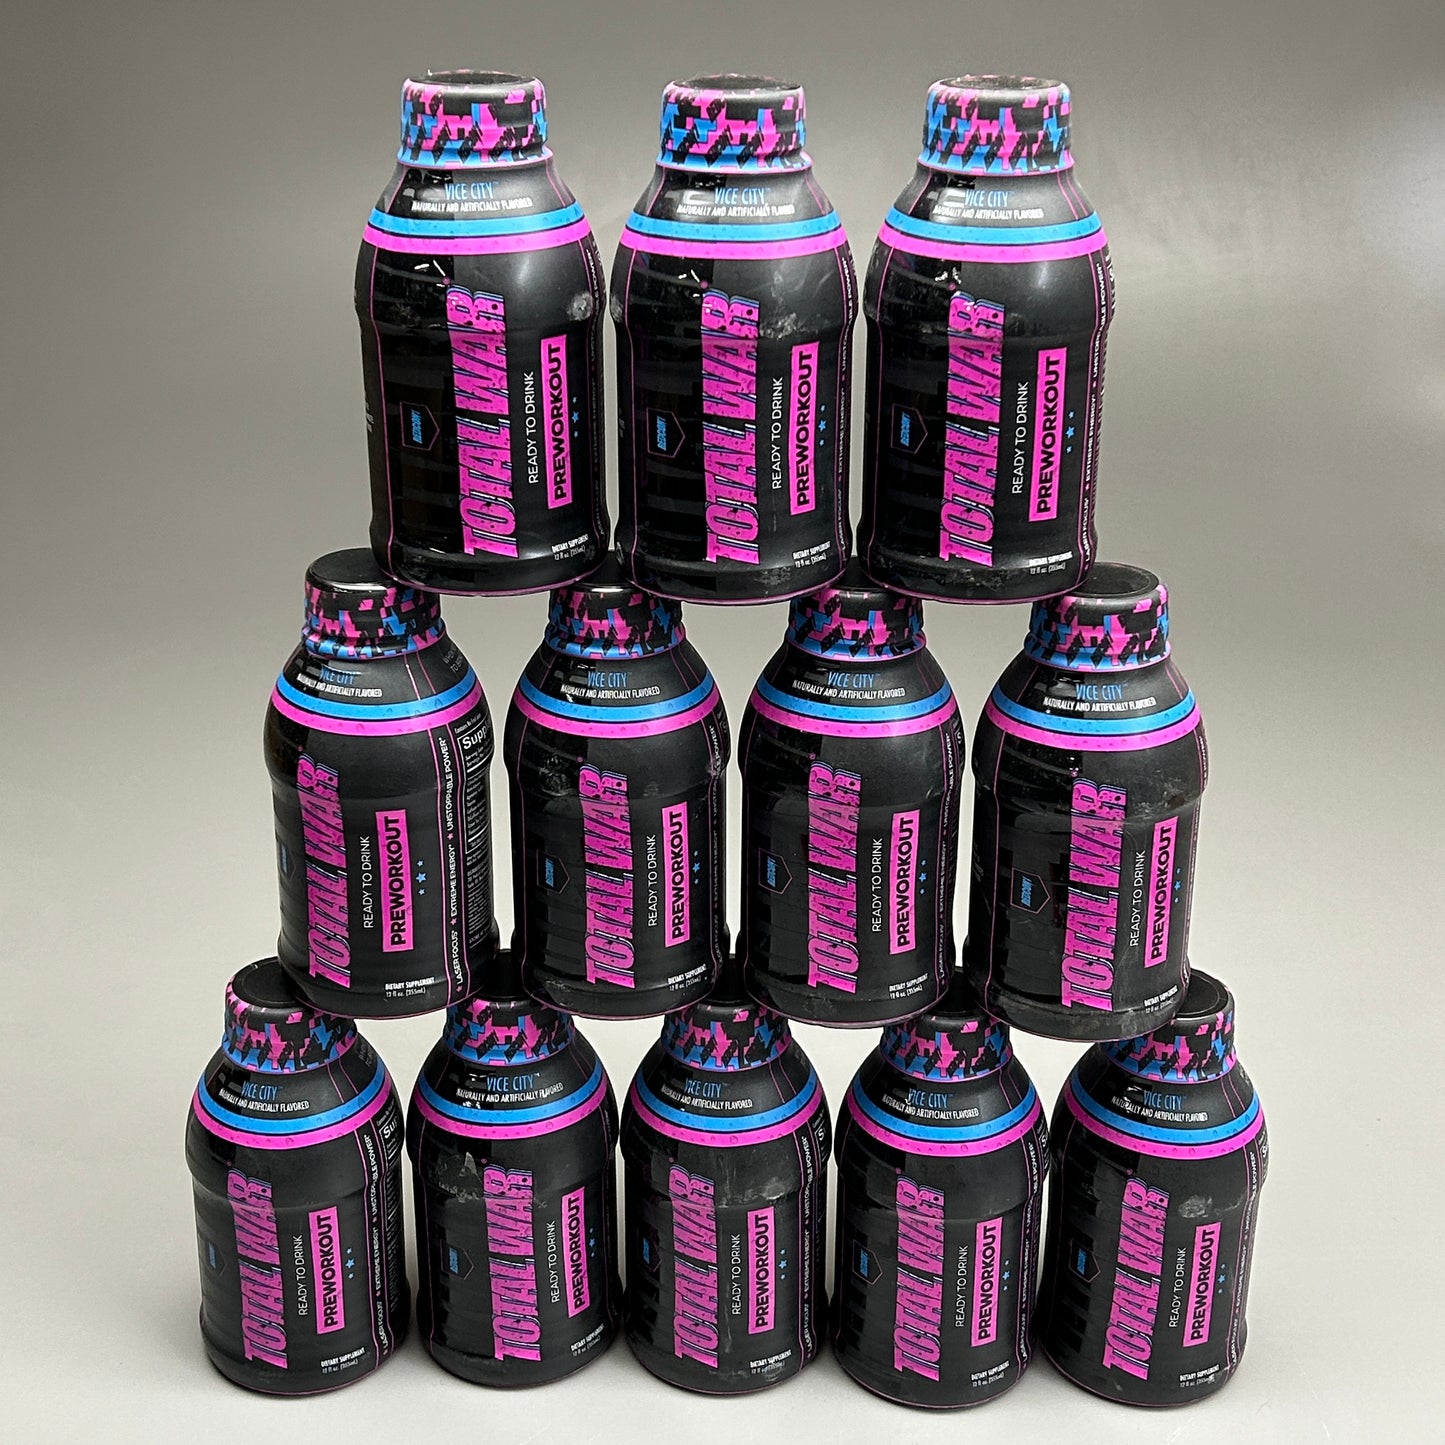 REDCON1 Total War Preworkout Dietary Supplement Vice City 12x12 fl oz BB 09/24 (New)